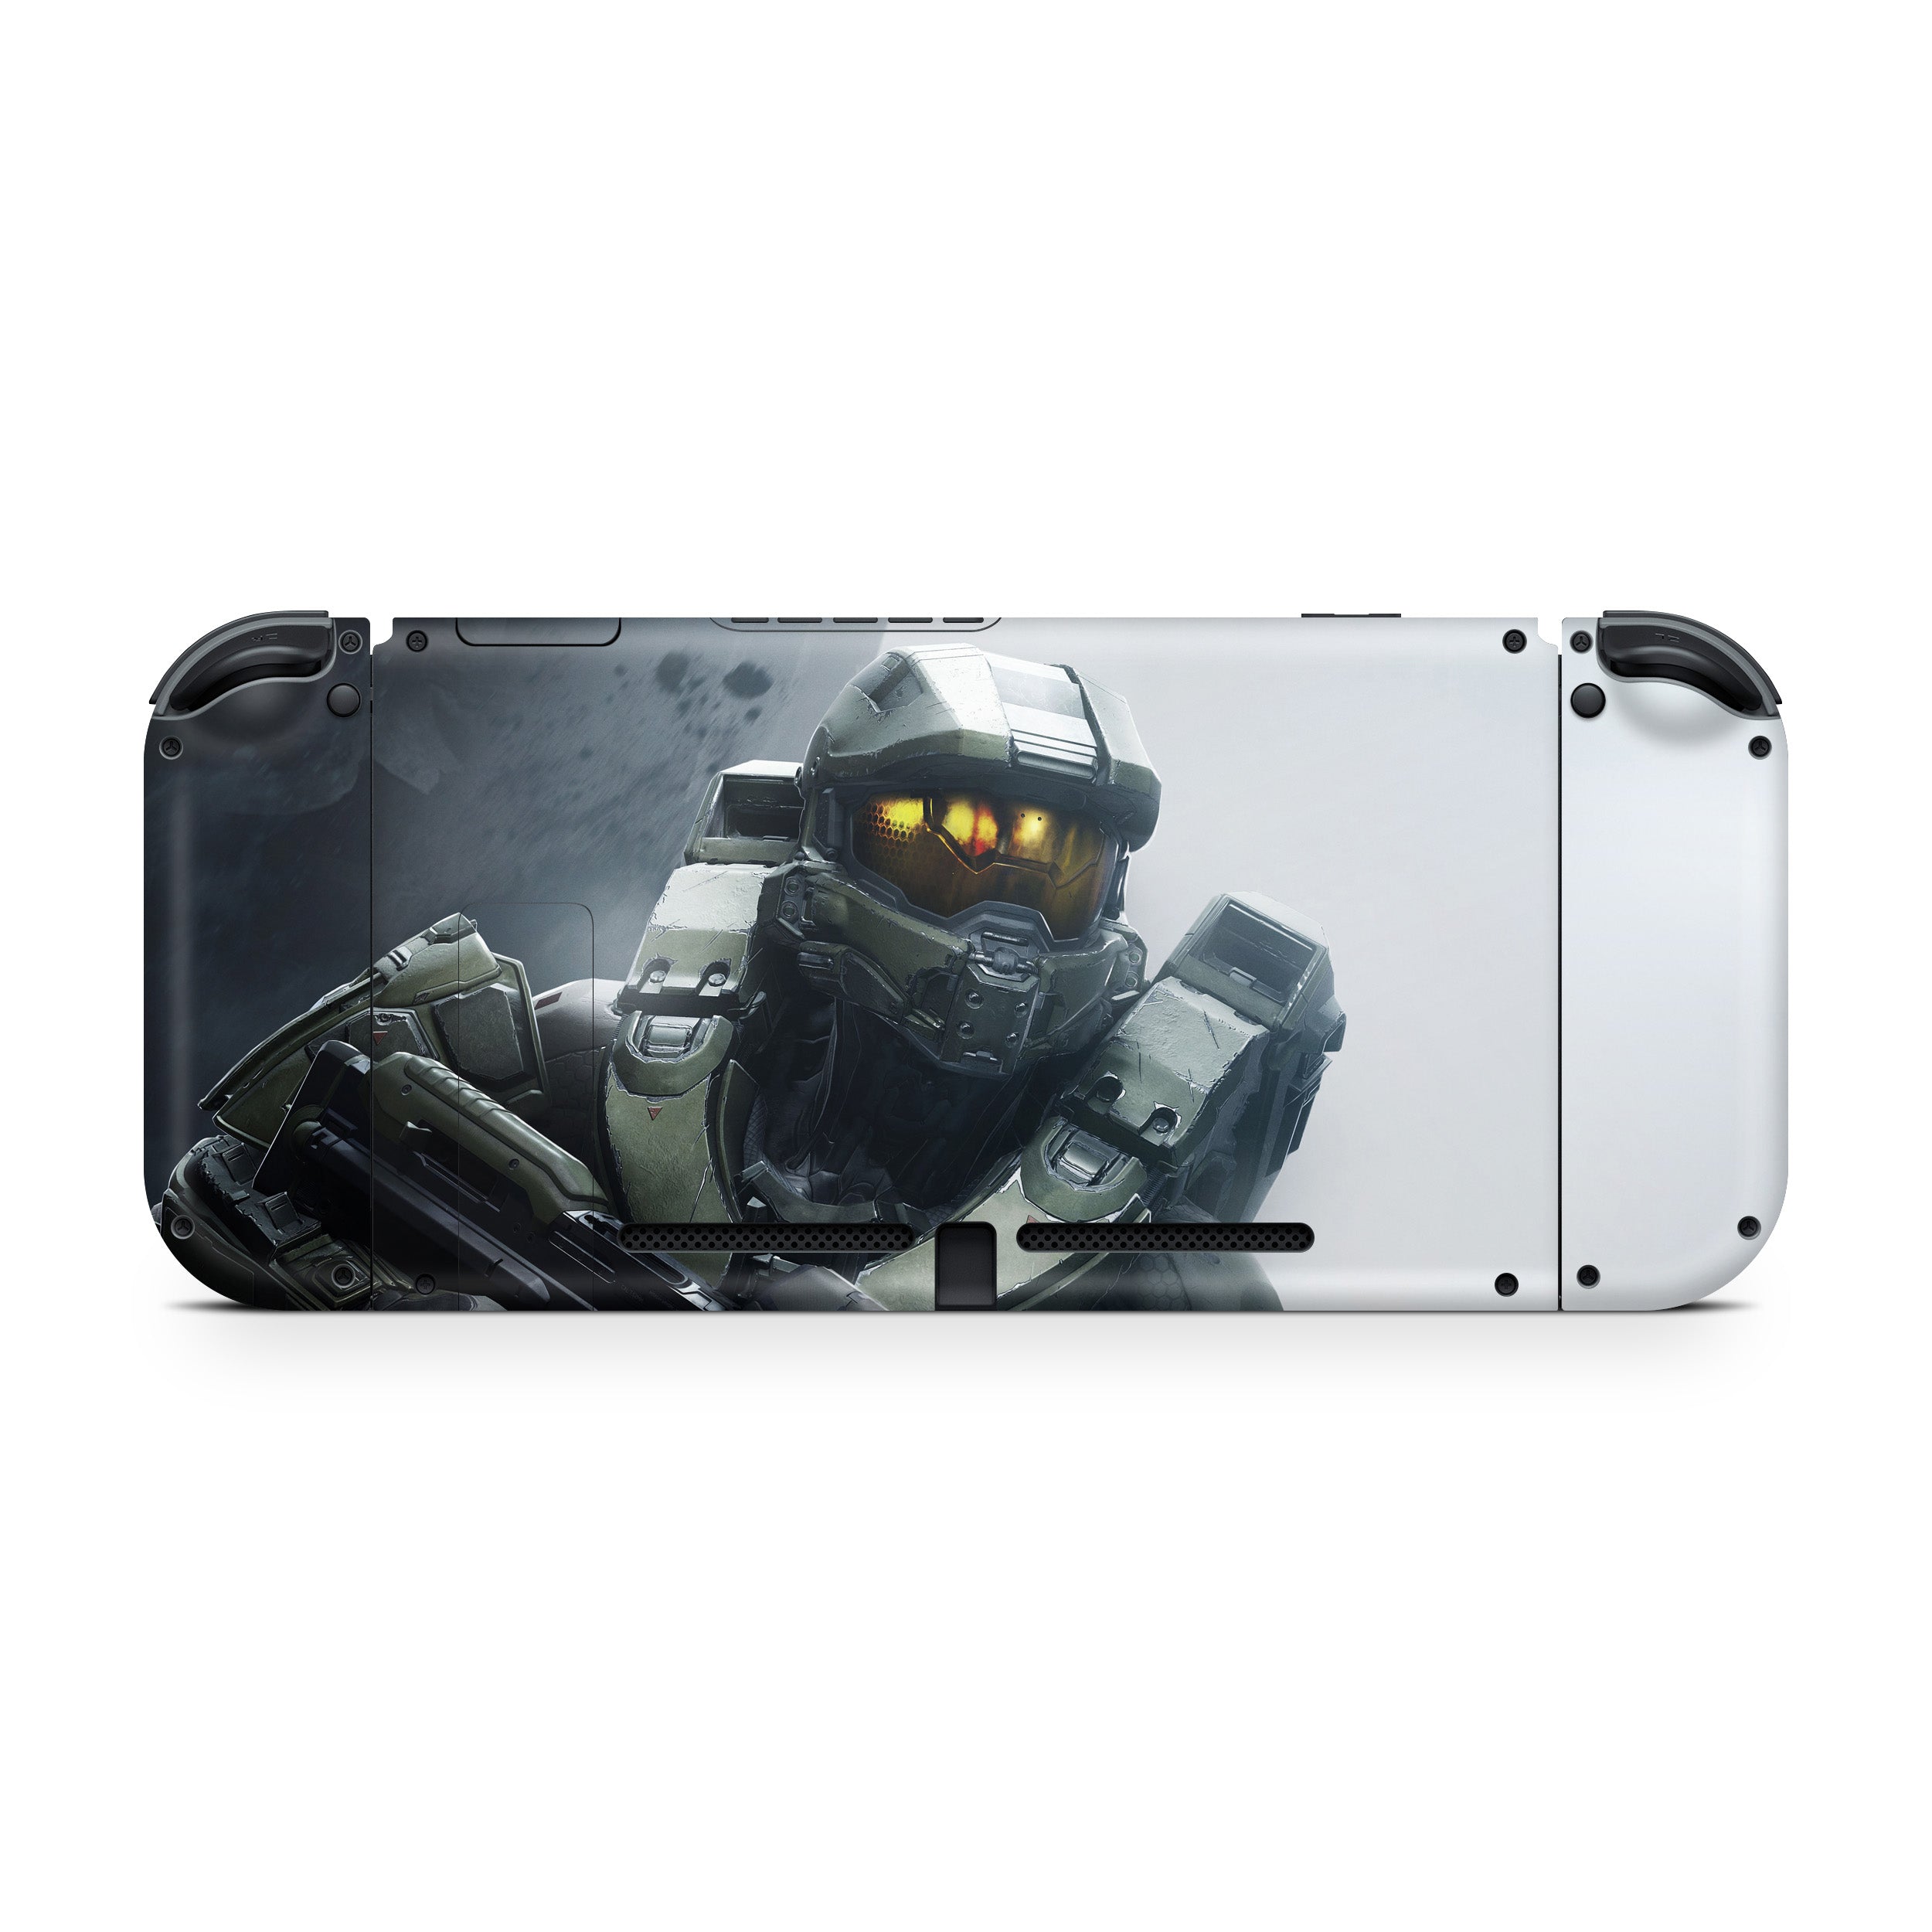 Customize Your Nintendo Switch with Halo Skin! (Version 1)